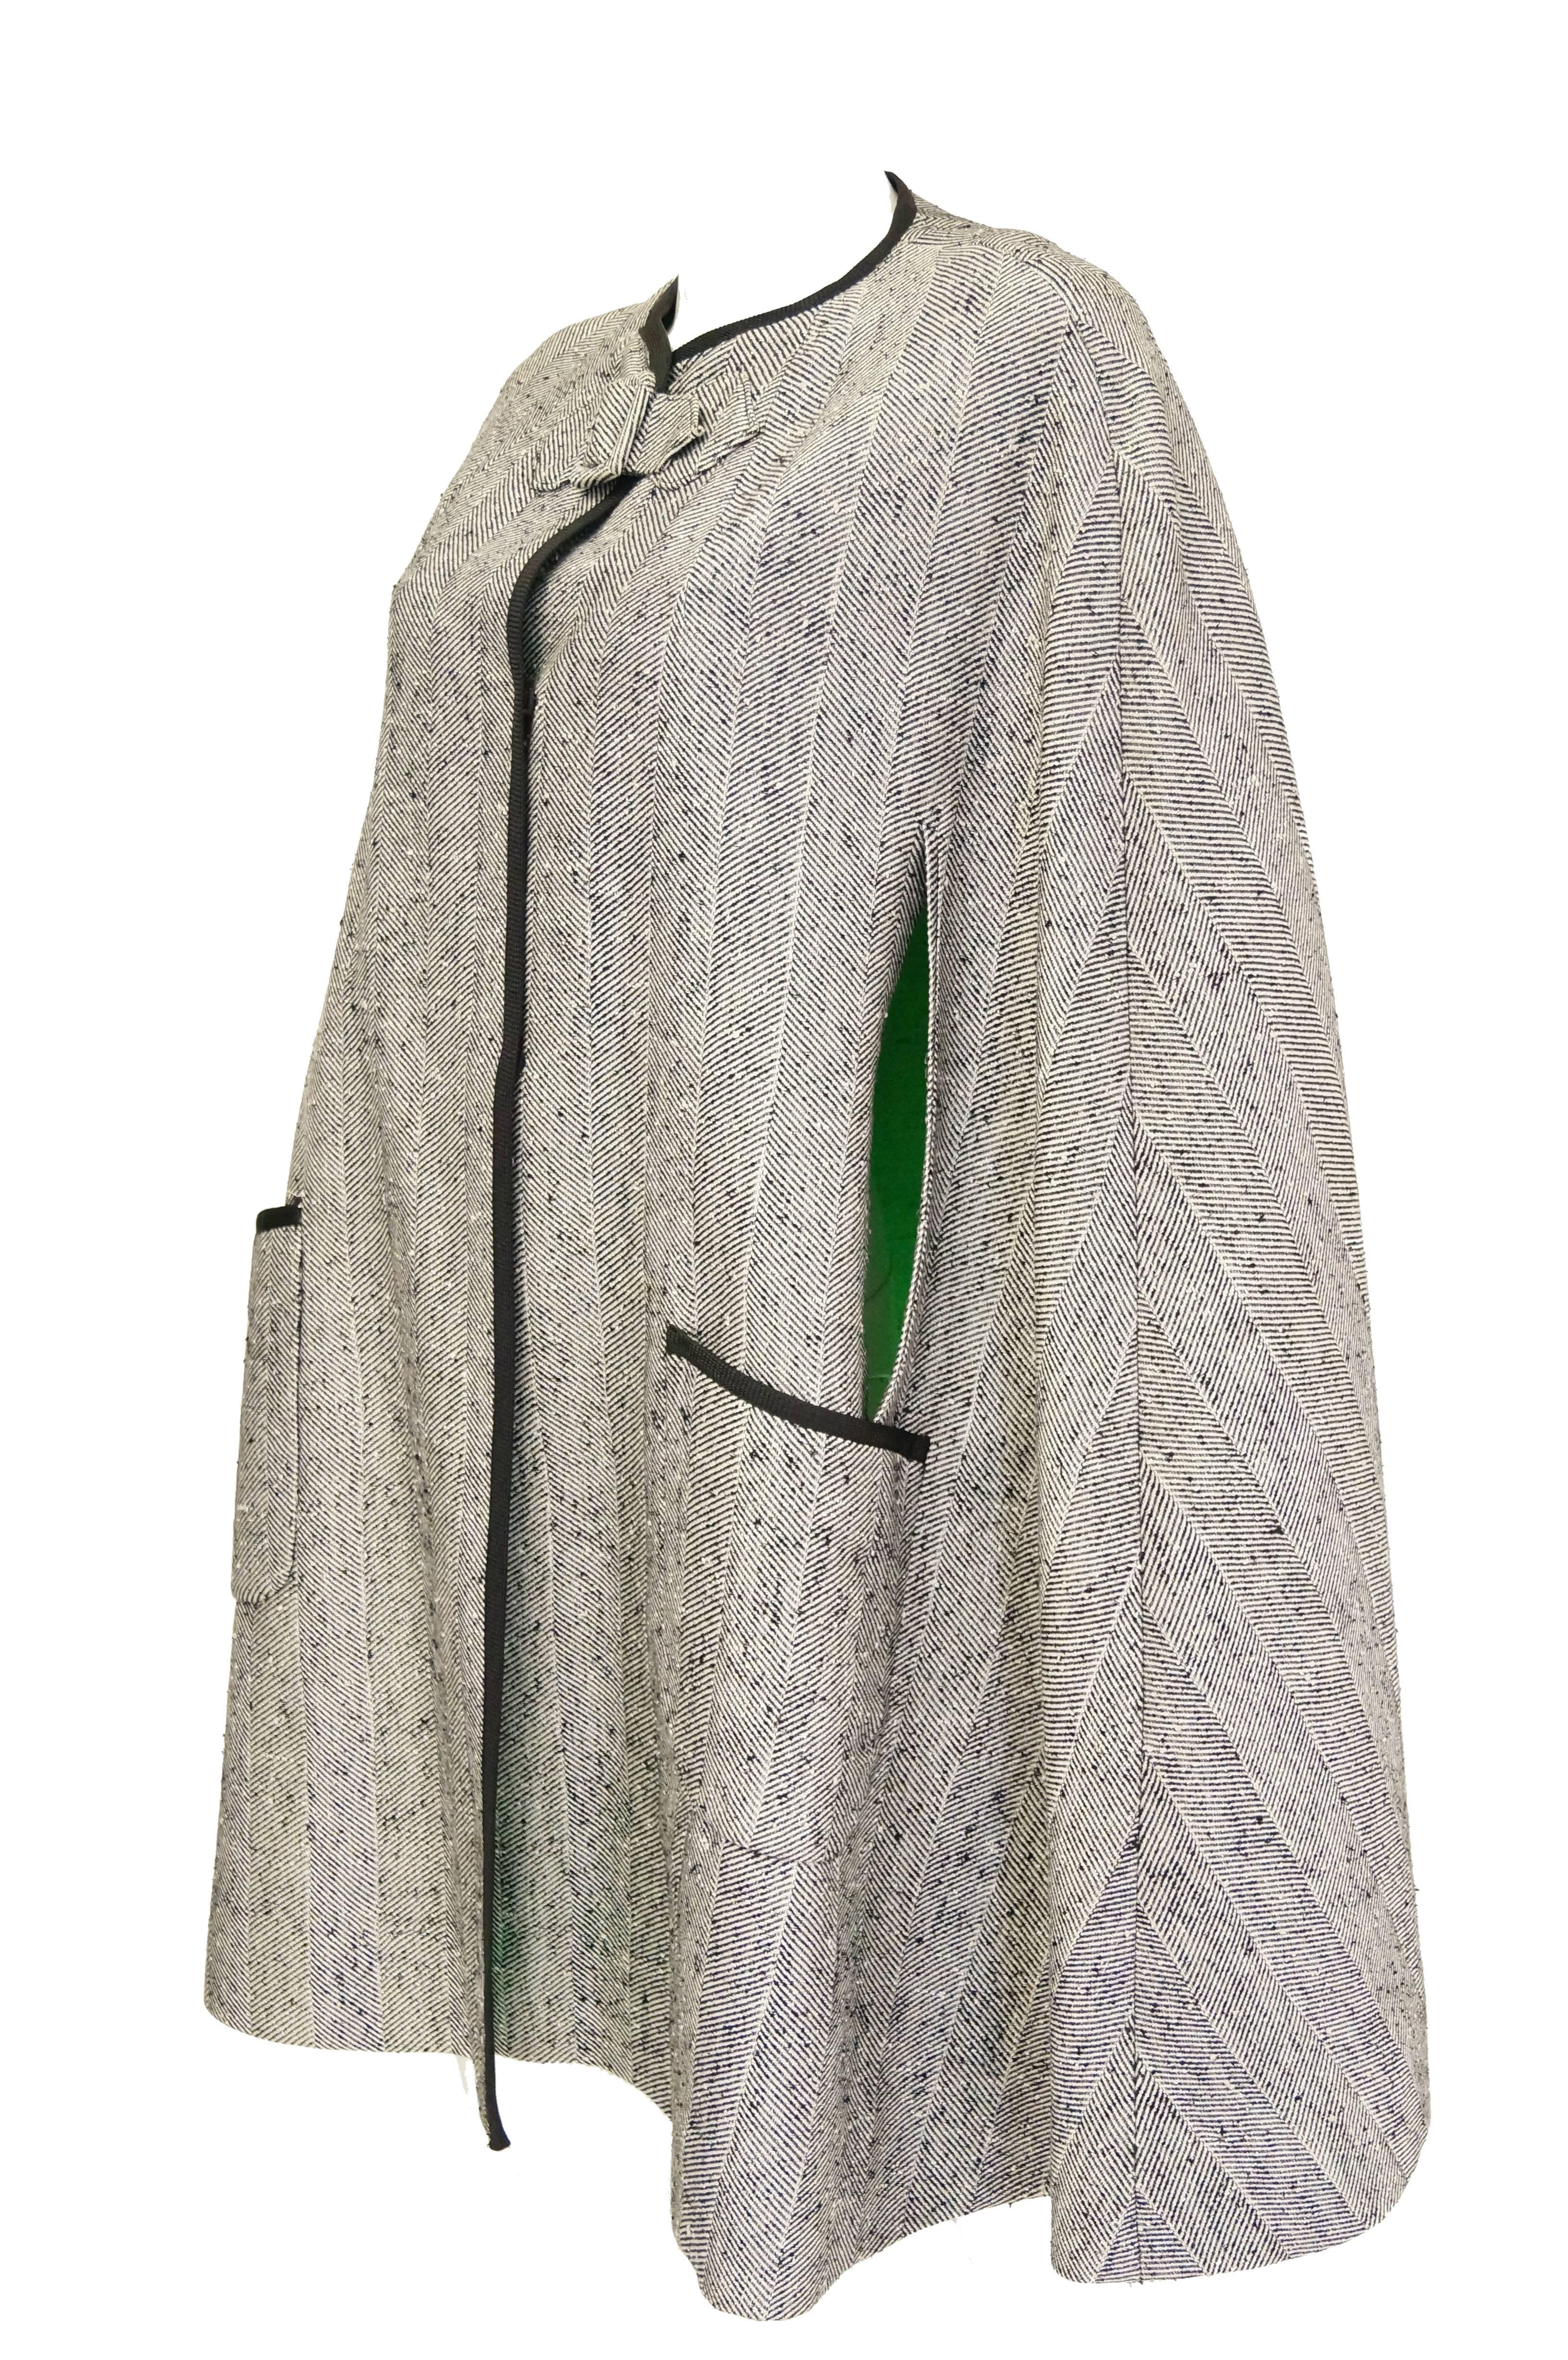 1960s Herringbone Cape w/ Apple Green Lining In Excellent Condition For Sale In Houston, TX